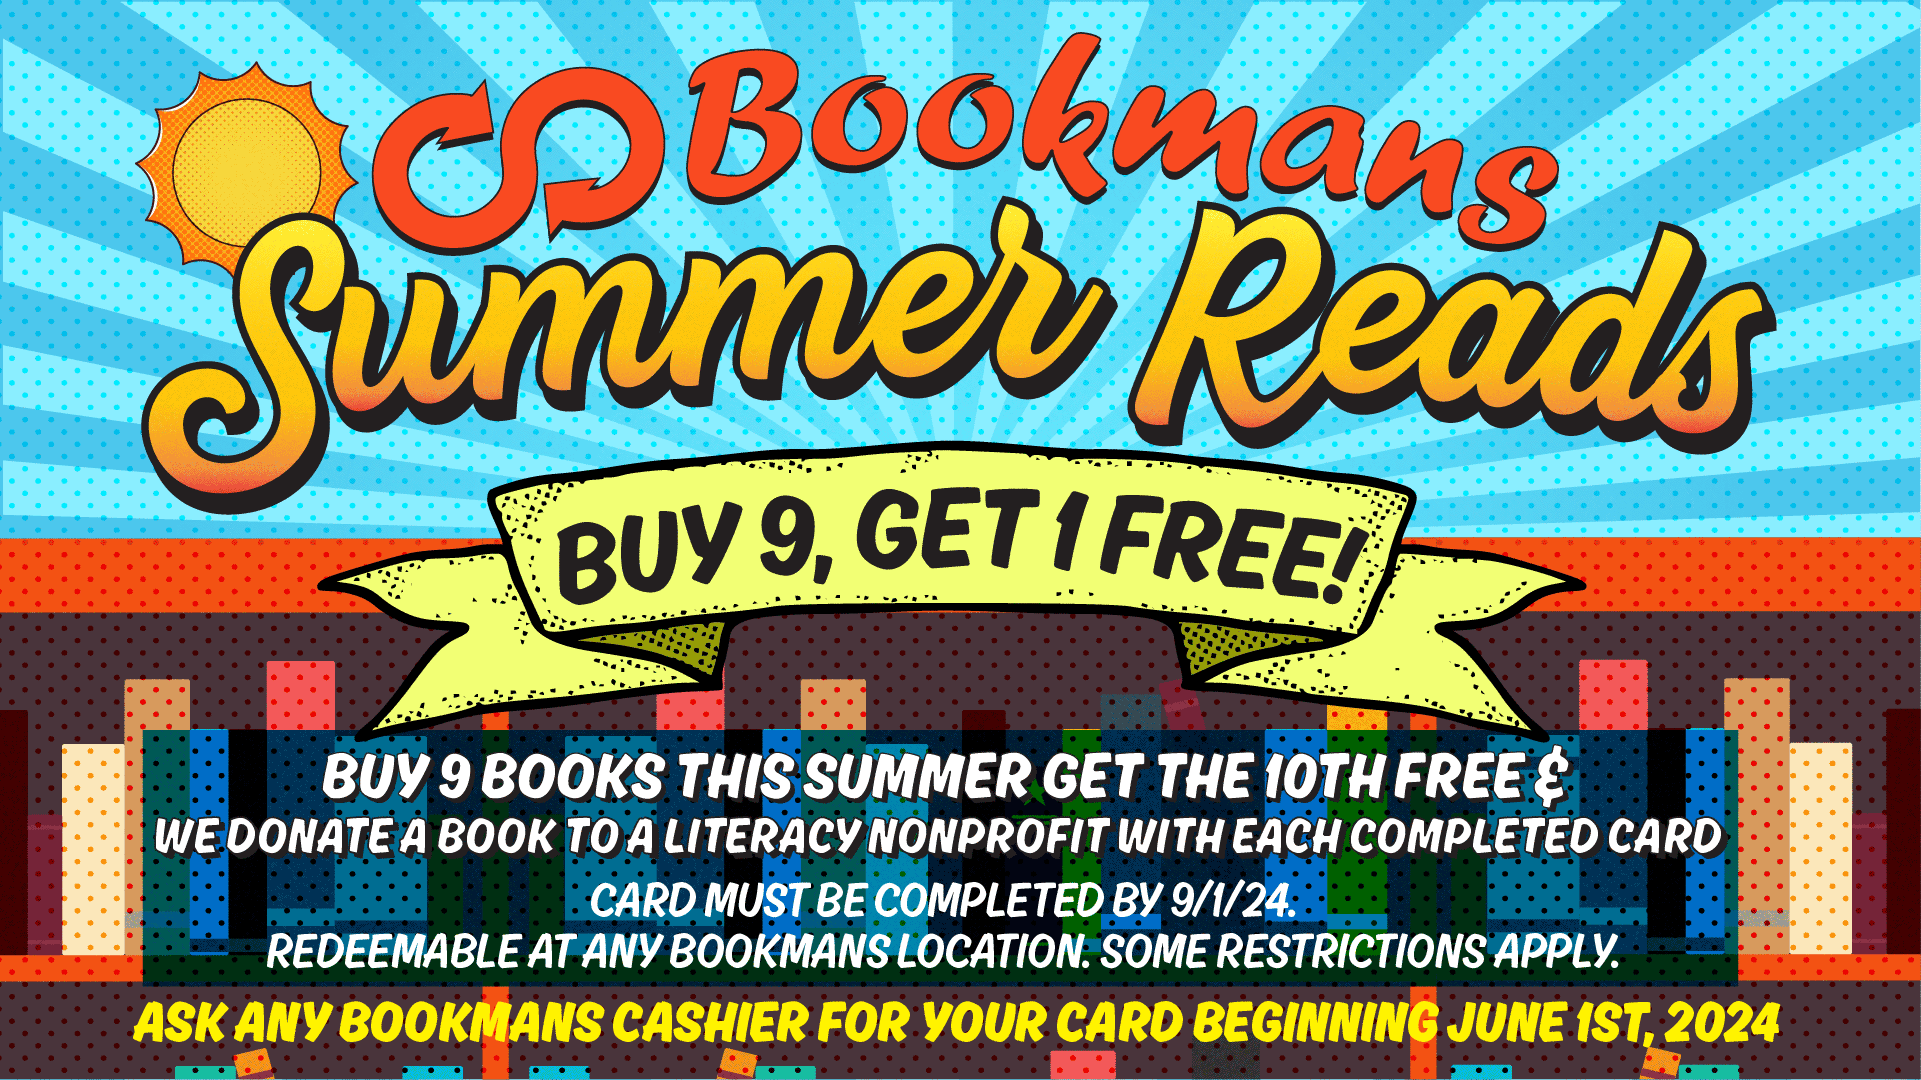 Image is promoting a summer reading program with a sun and bookshelf. Bookmans logo on top then it says Summer Reads Buy 9, Get 1 free buy 9 books this summer get the 10th free & we donate a book to literacy nonprofit with each completed card. card must be completed by 9/1/24 redeemable at any bookmans location. some restrictions apply. ask any bookmans cashier for your card beginning june 1st, 2024